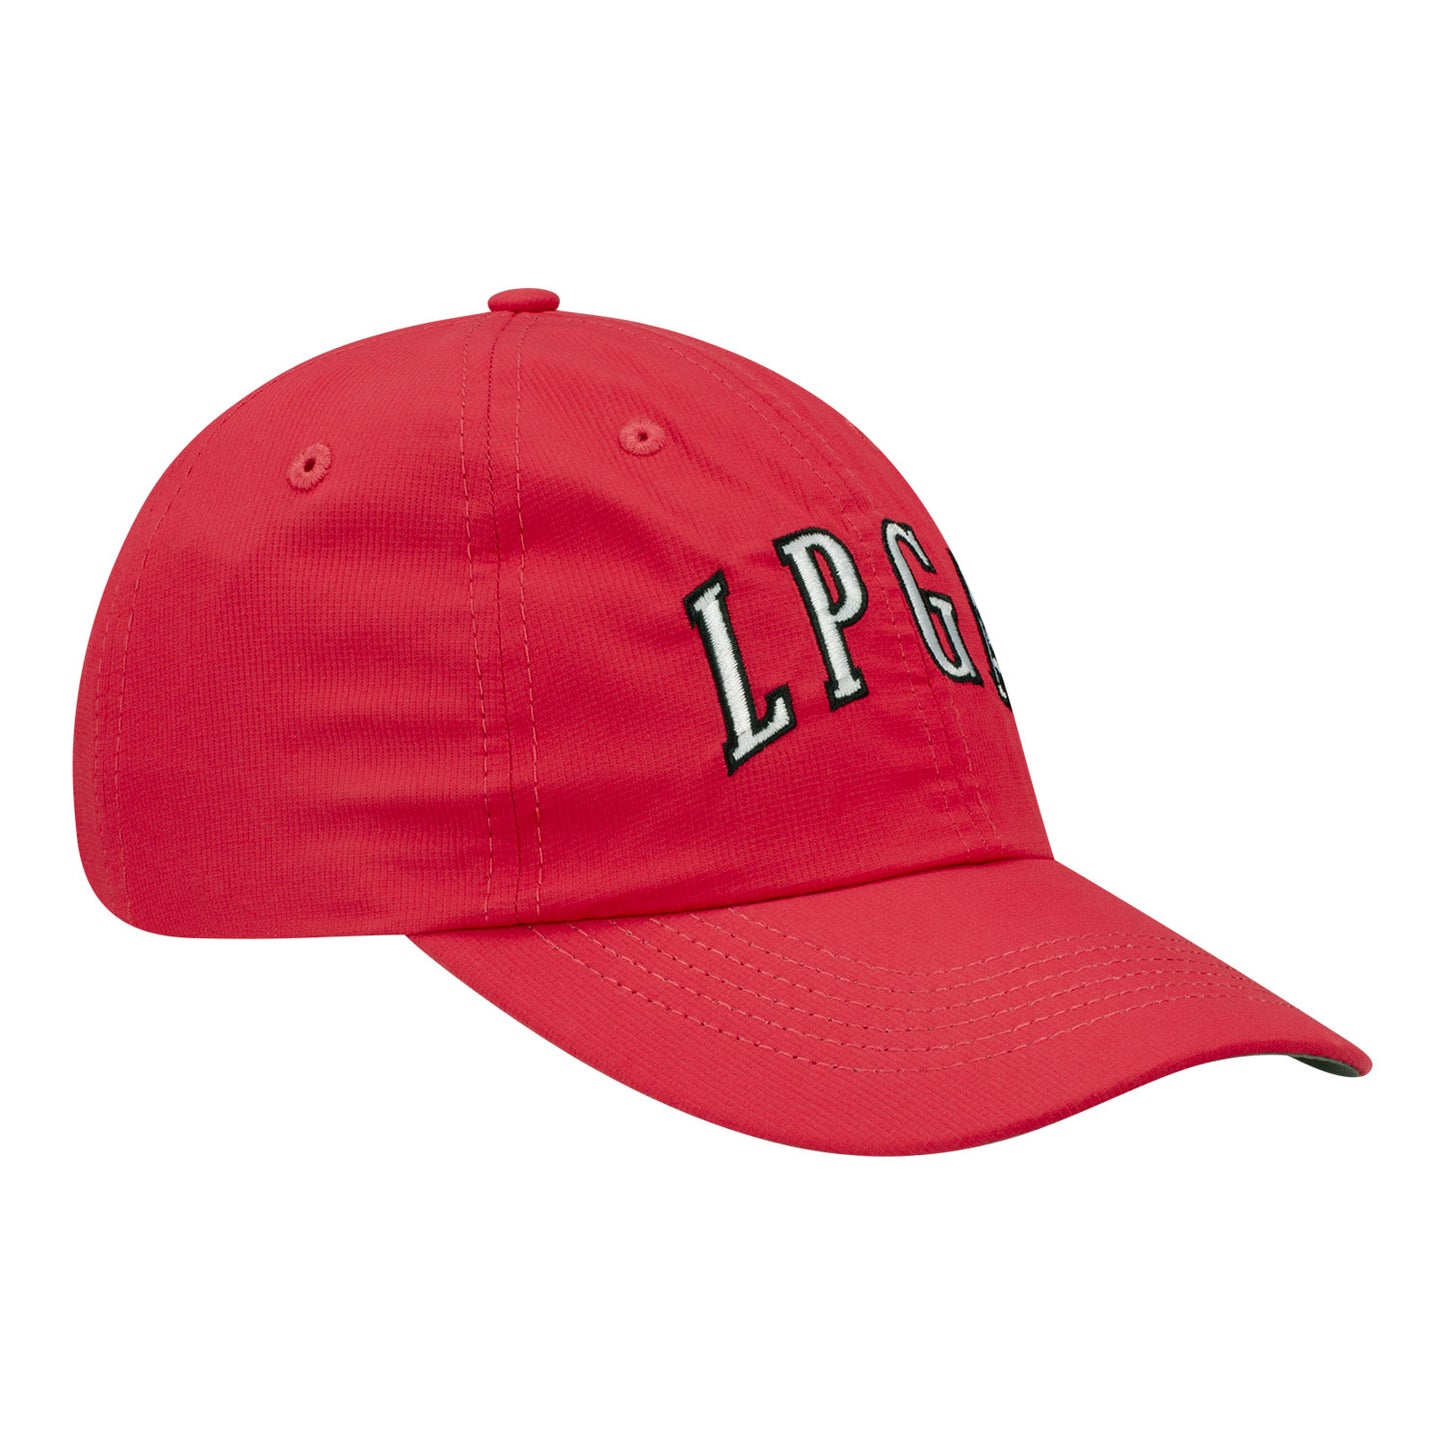 Imperial LPGA Women's Hat in Nantucket Red - Angled Right Side View